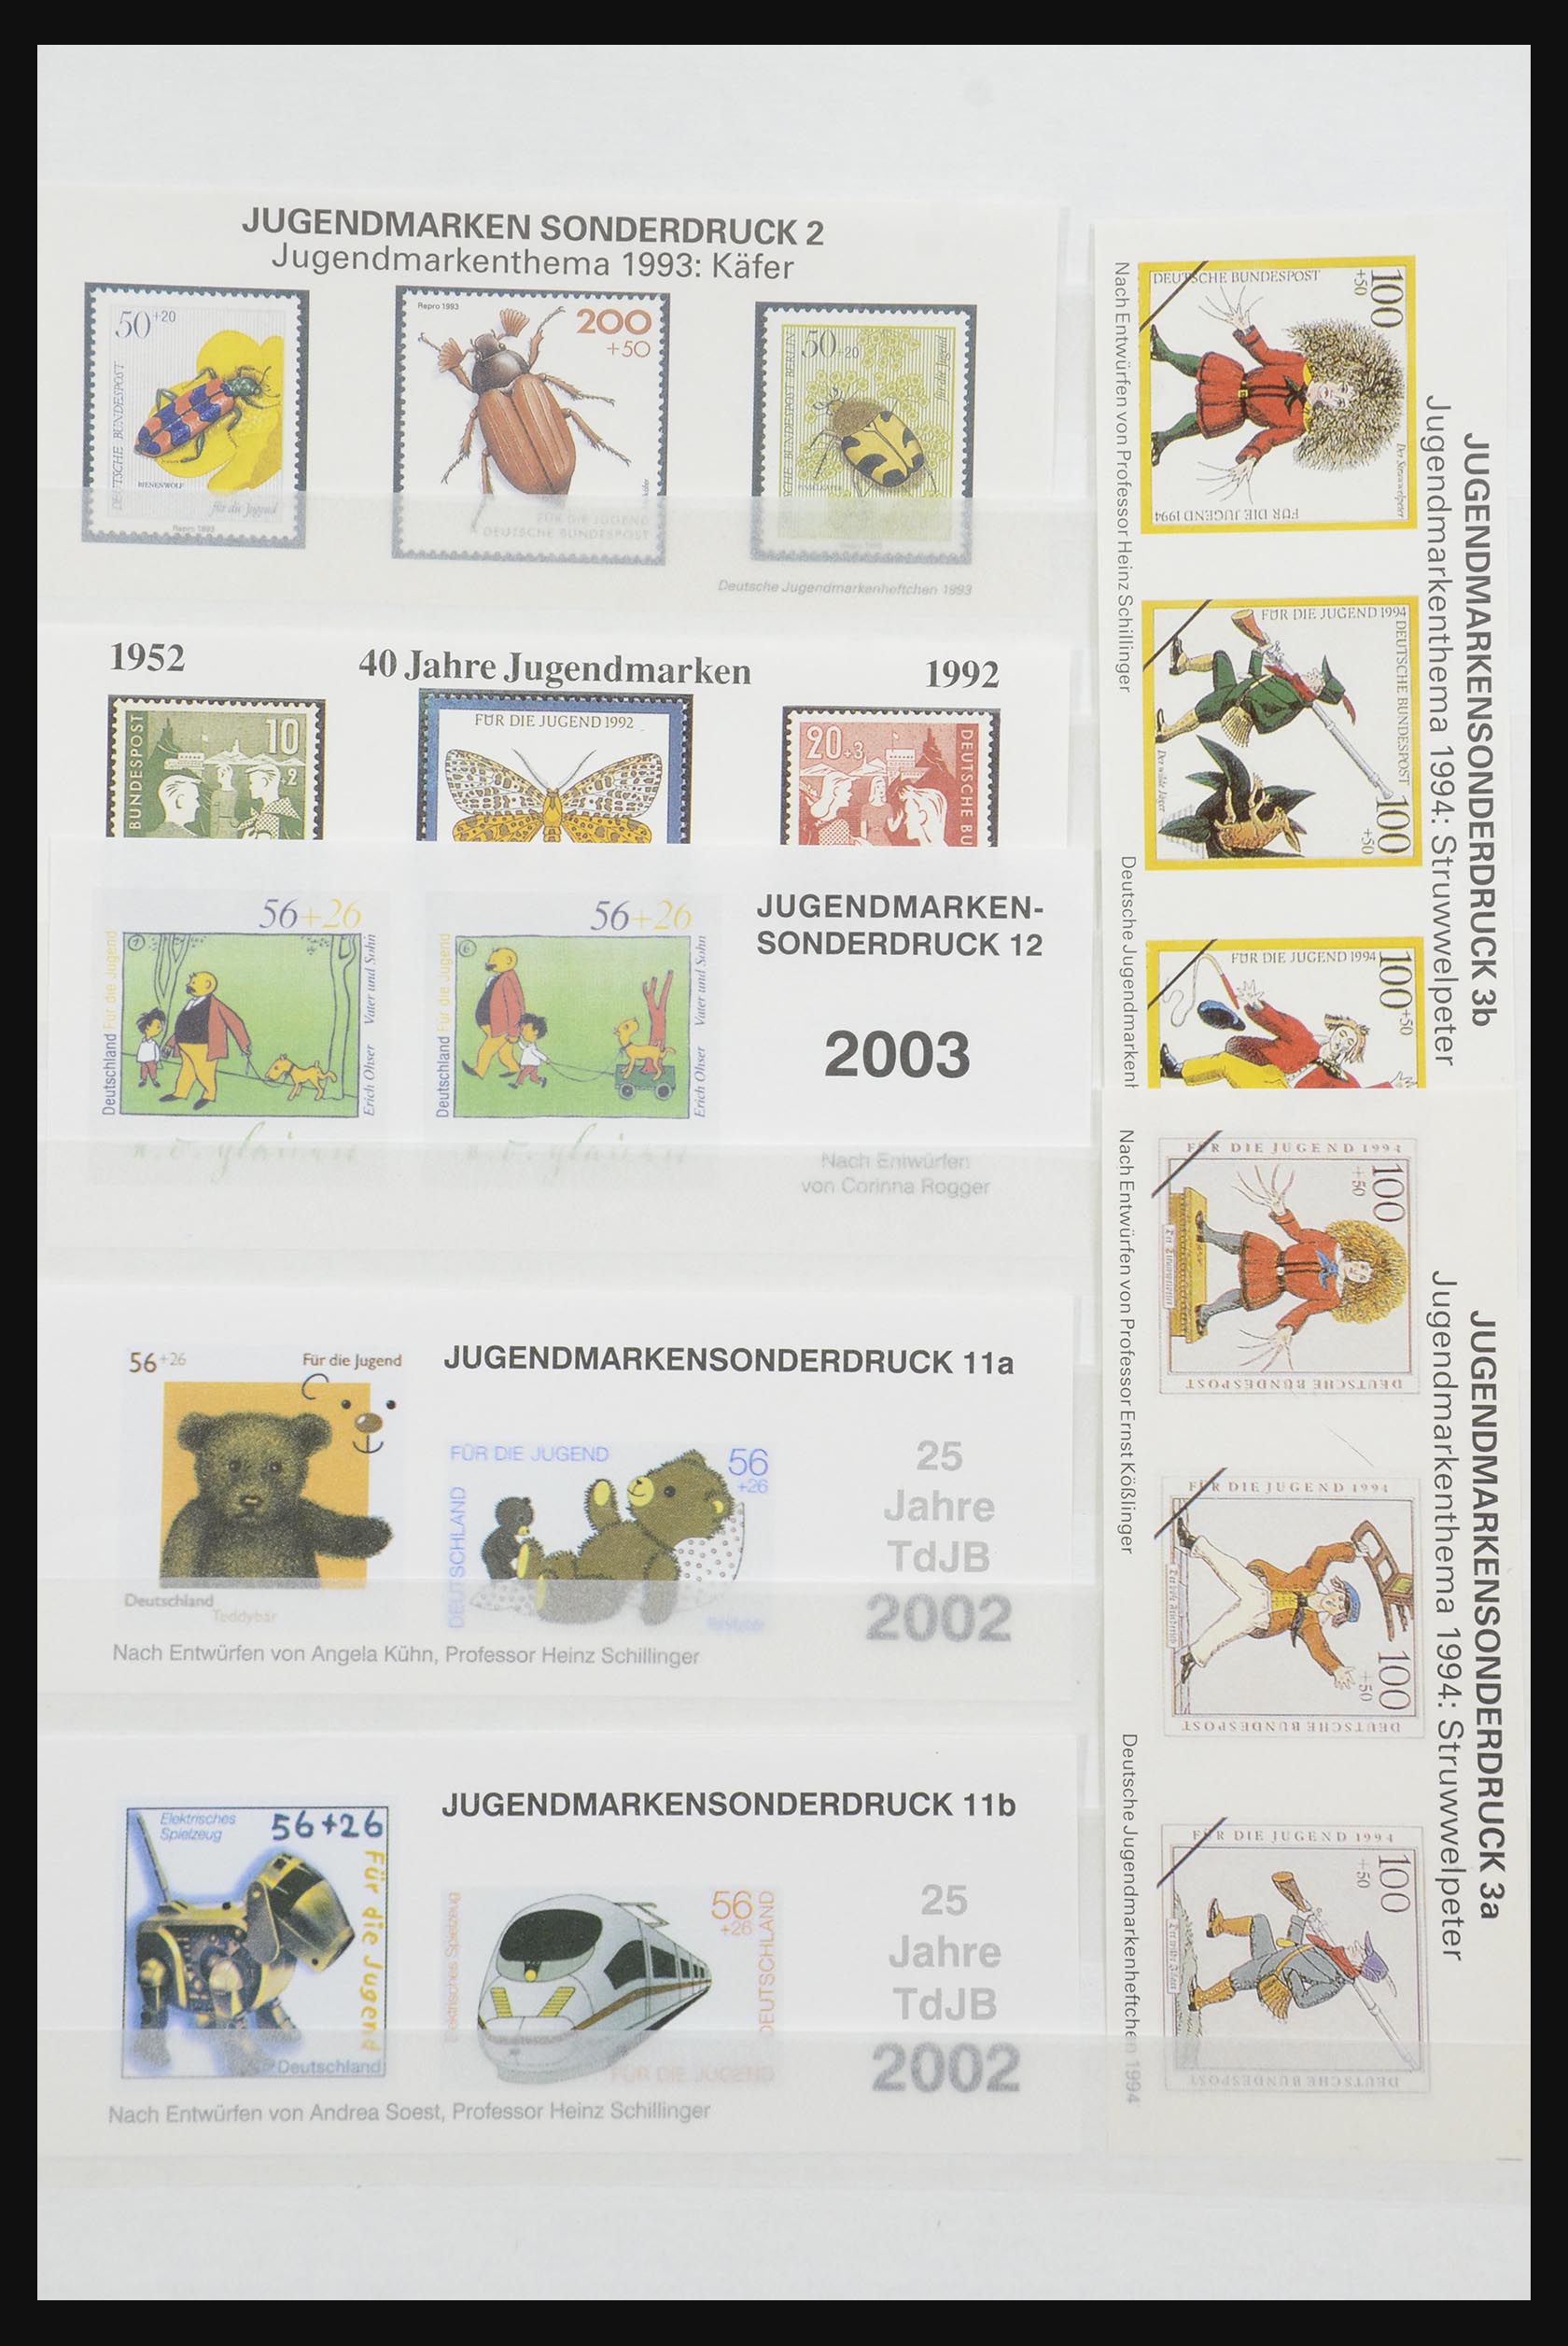 32050 017 - 32050 Bundespost special sheets 1980-2010.